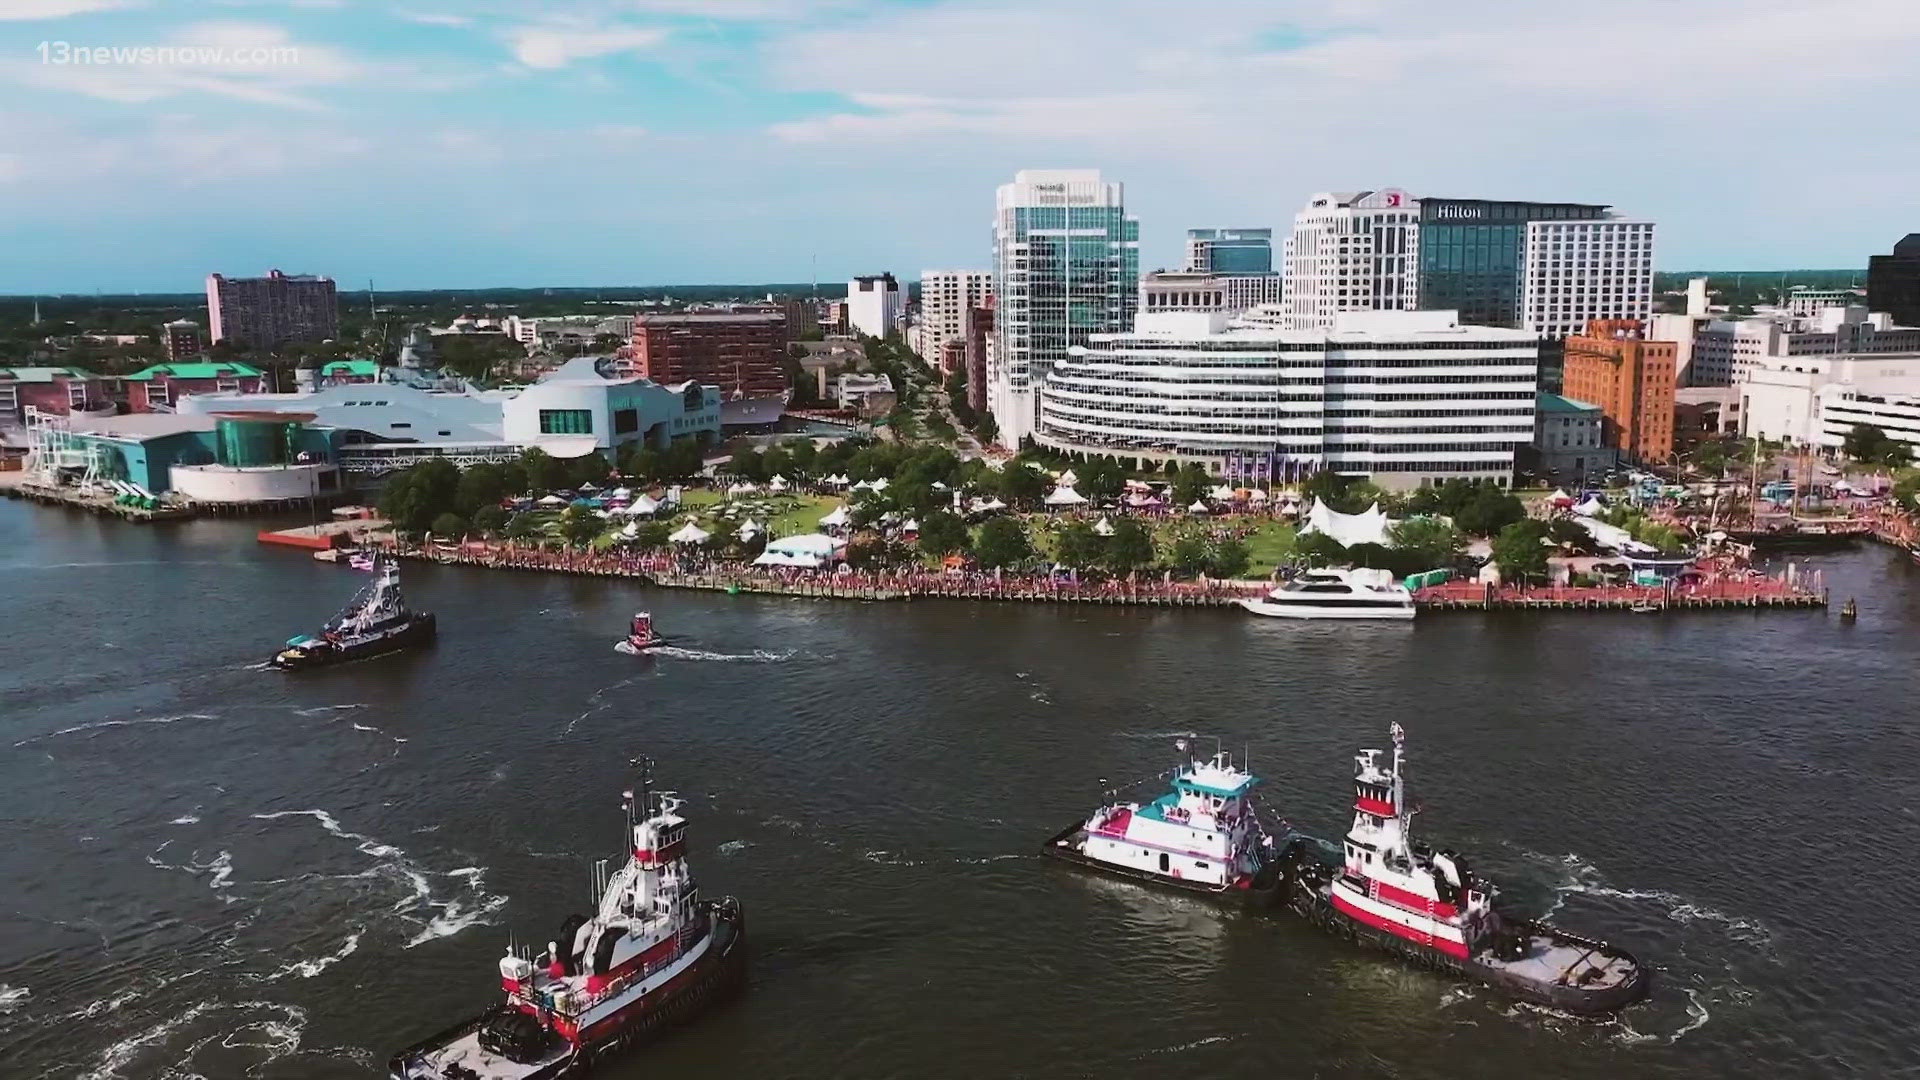 Thousands of people will head to Norfolk's Town Point Park this weekend for Harborfest 2024, the city's free annual celebration of the maritime and Naval community.